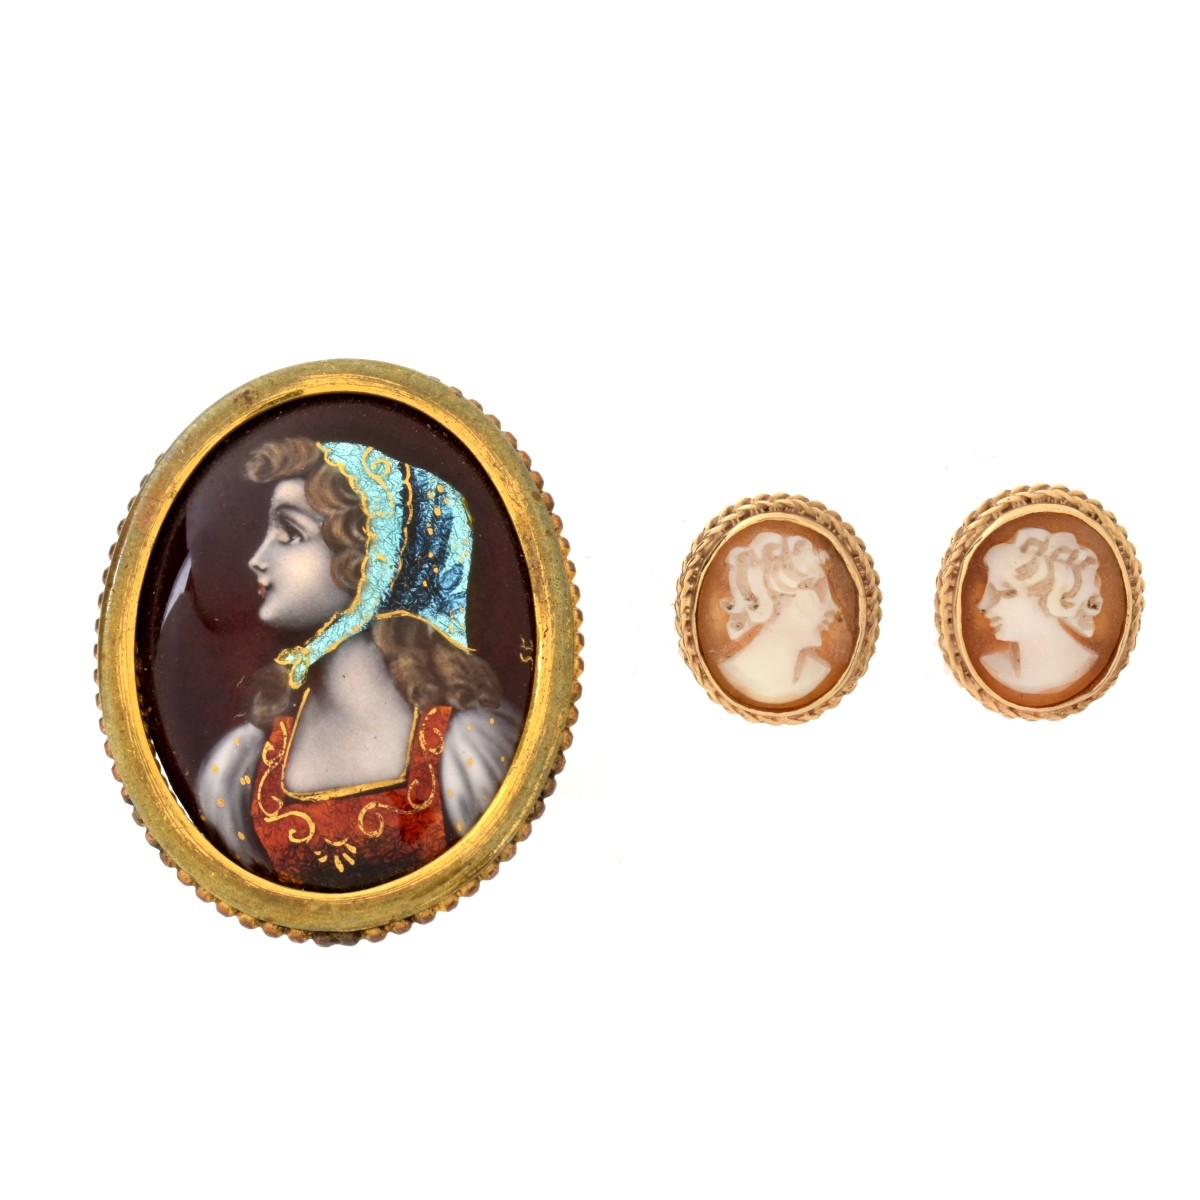 Antique Portrait Brooch and Cameo Earrings